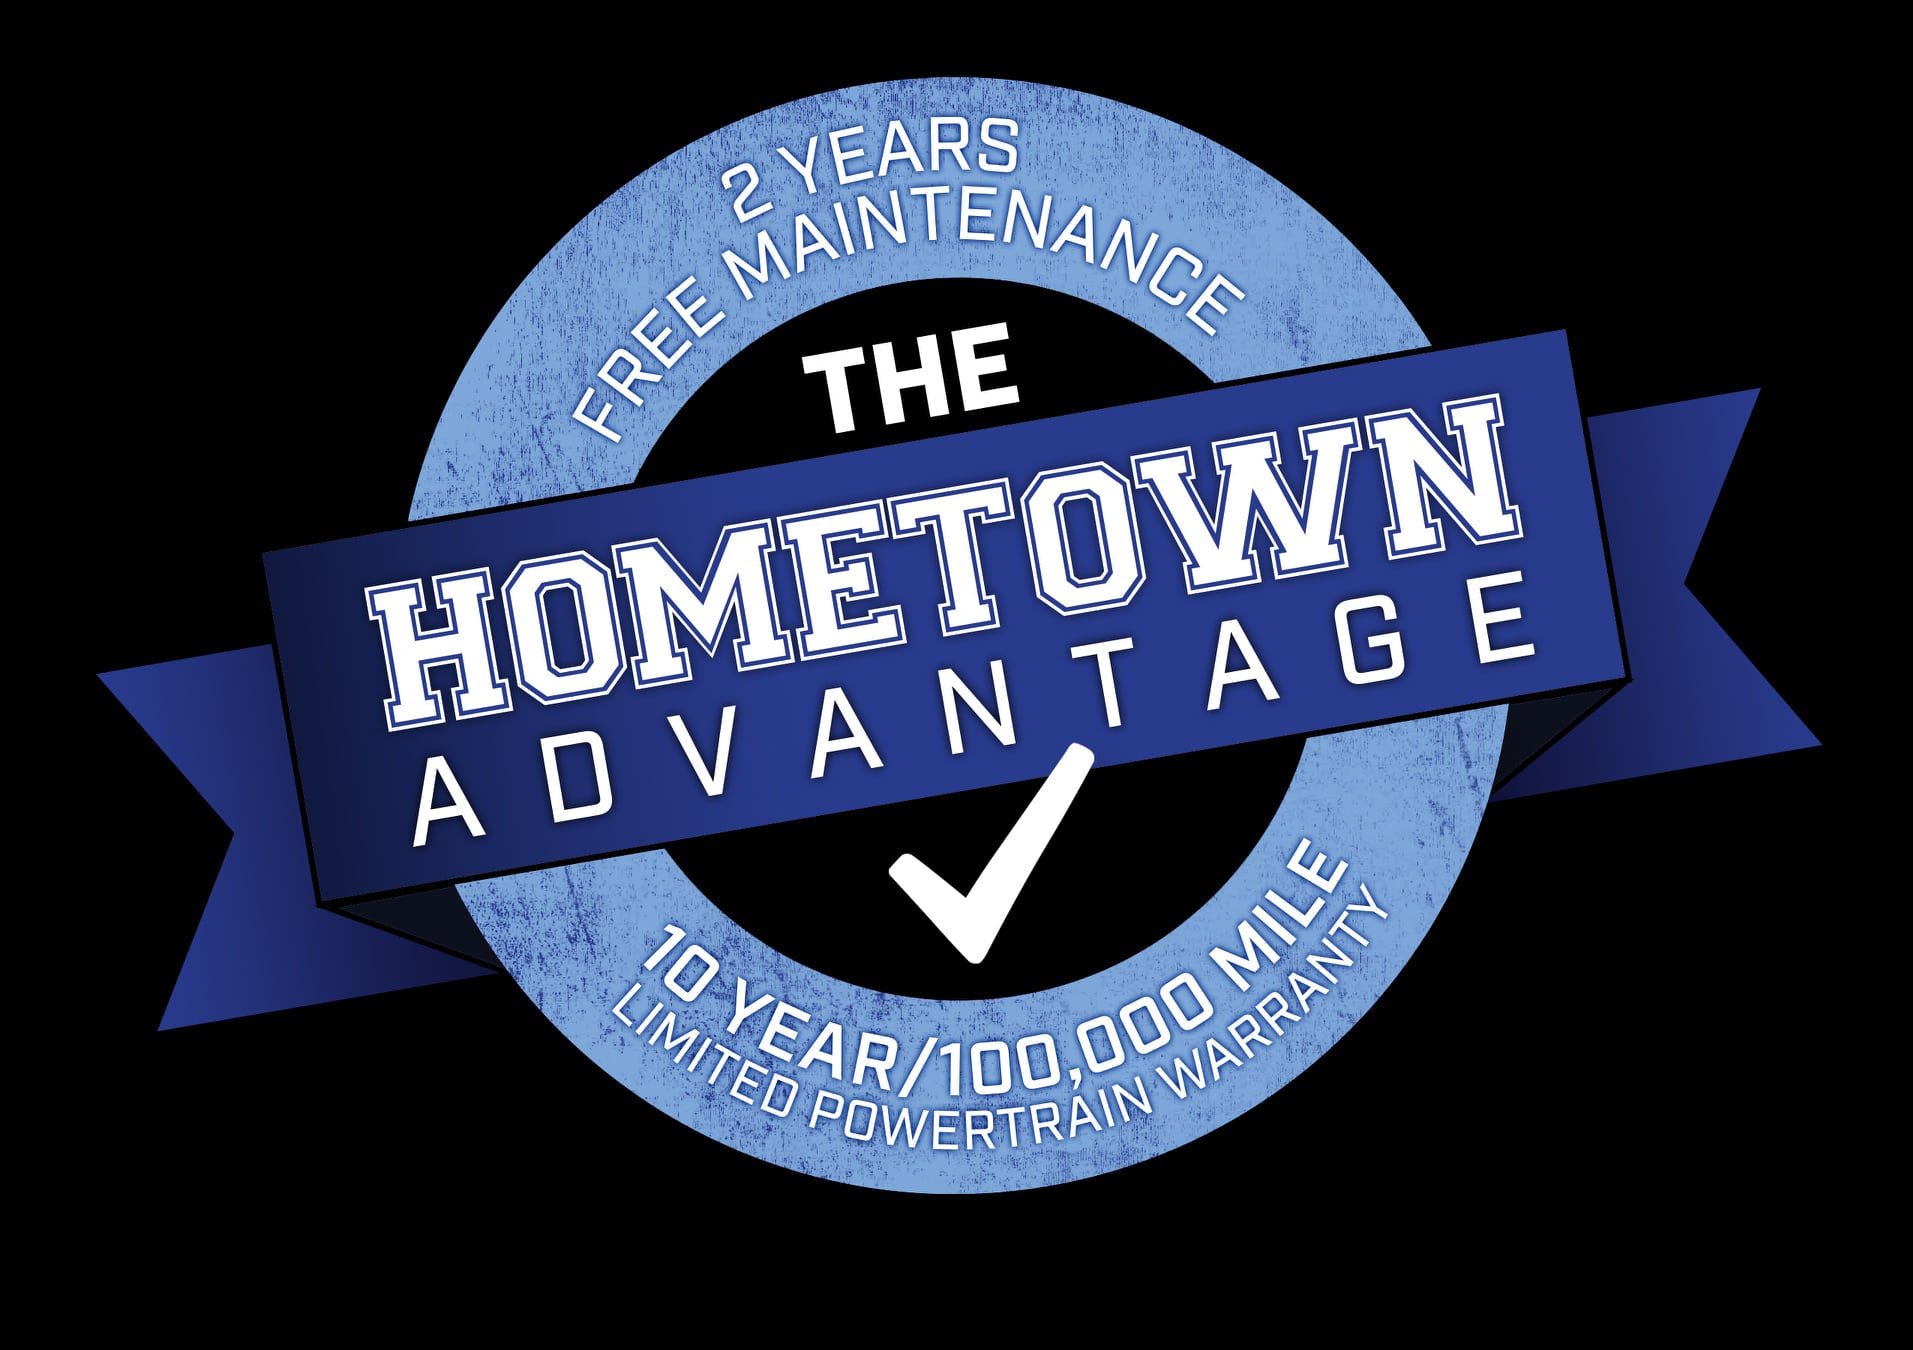 You can get a warranty on a certified preowned car at Hometown Certified Preowned of Ironton